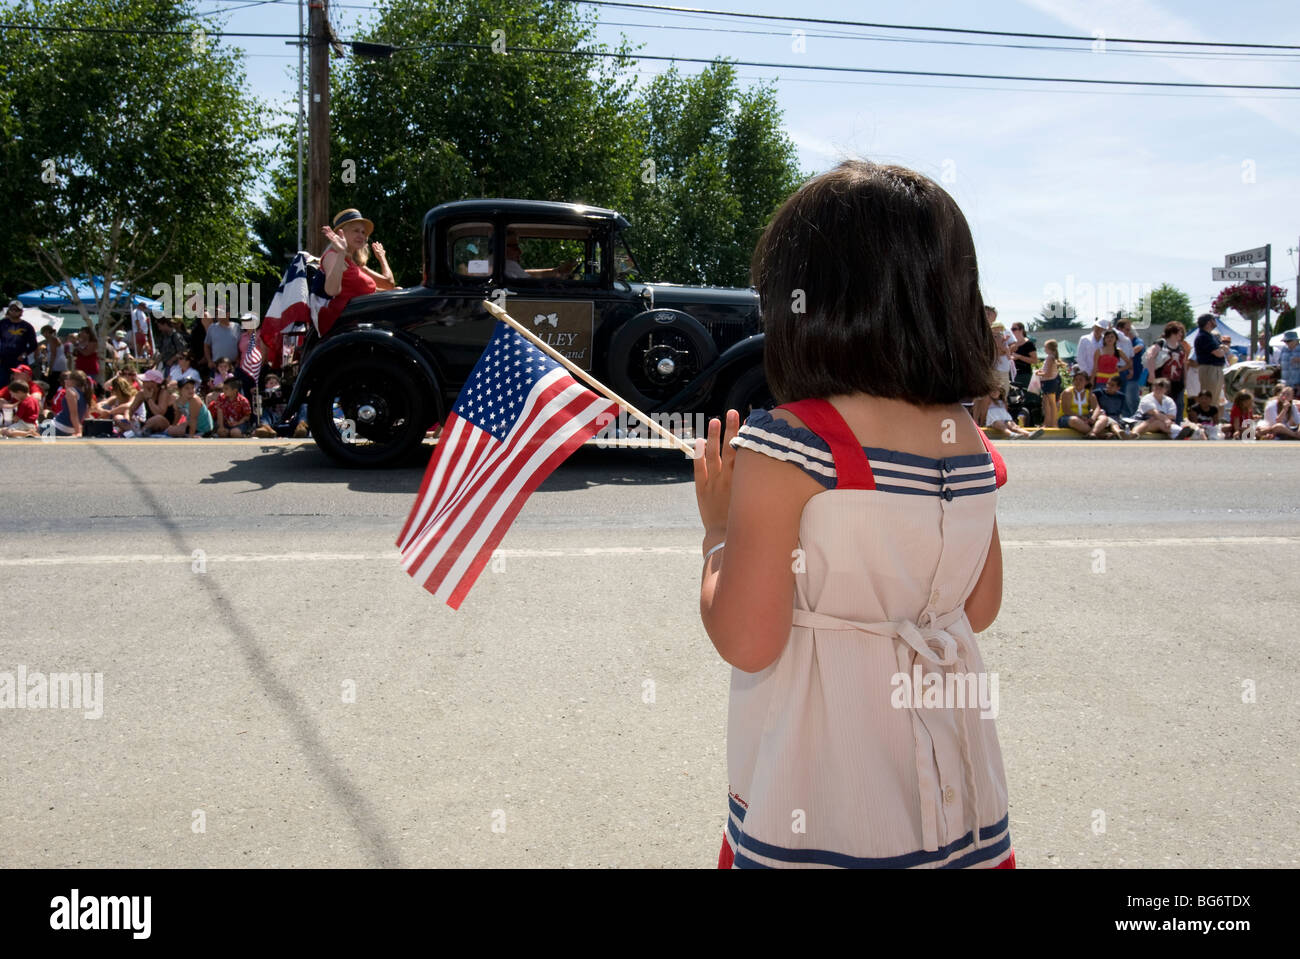 Girl holding American flag during 4th of July parade. Stock Photo